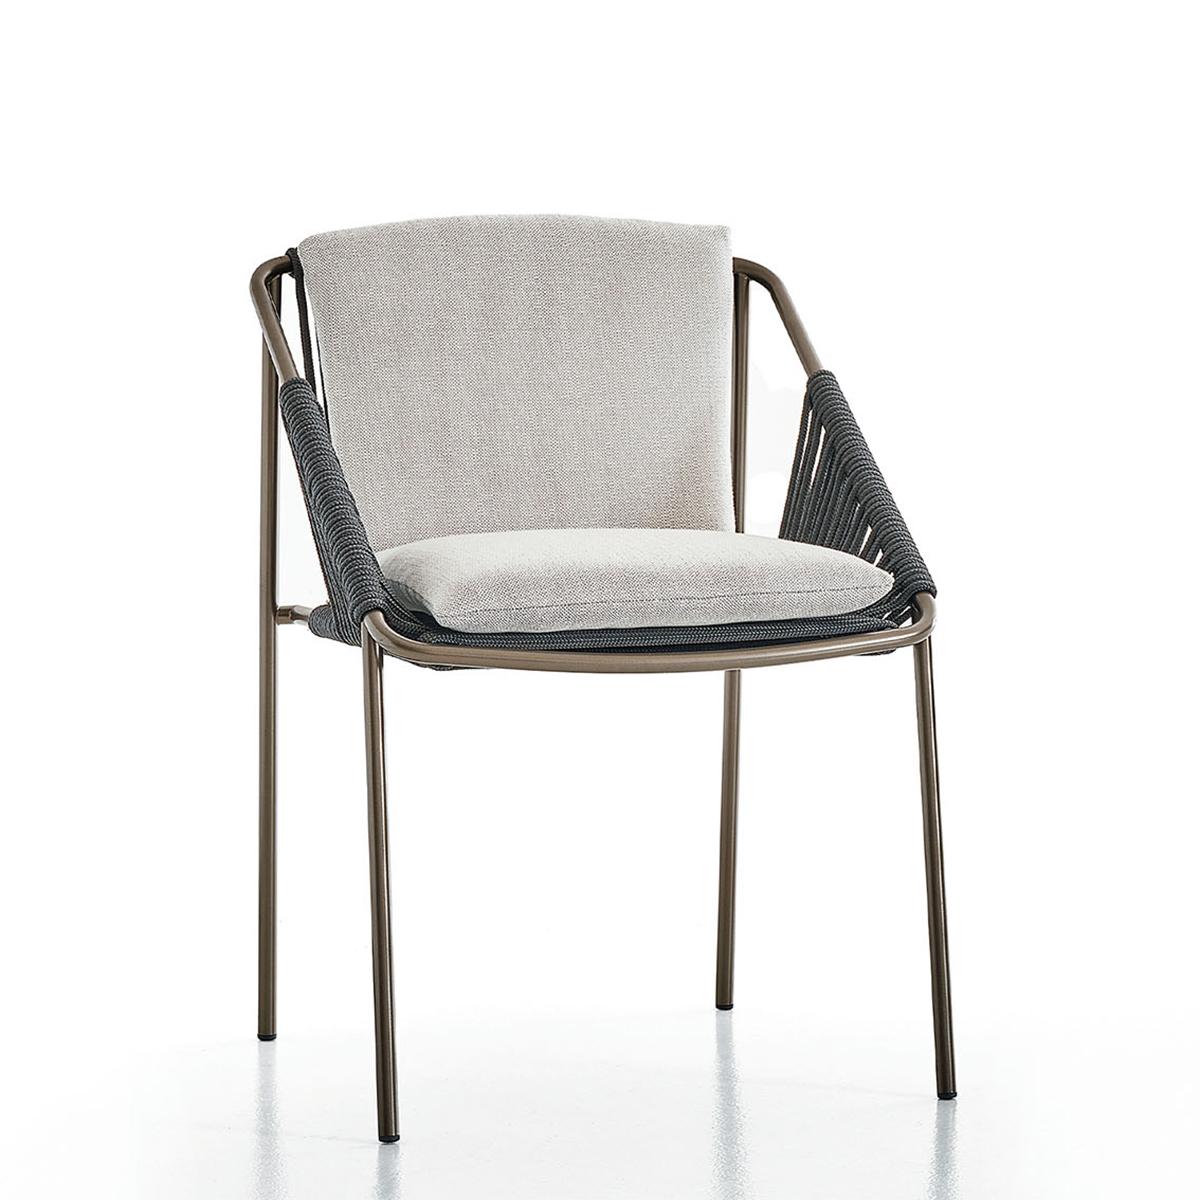 Chair Chelsy outdoor with frame structure in stainless steel.
in bronze finish, with cushion seat and backrest upholstered.
and covered with high quality outdoor fabric. Backrest and 
armrests made with woven grey rope.